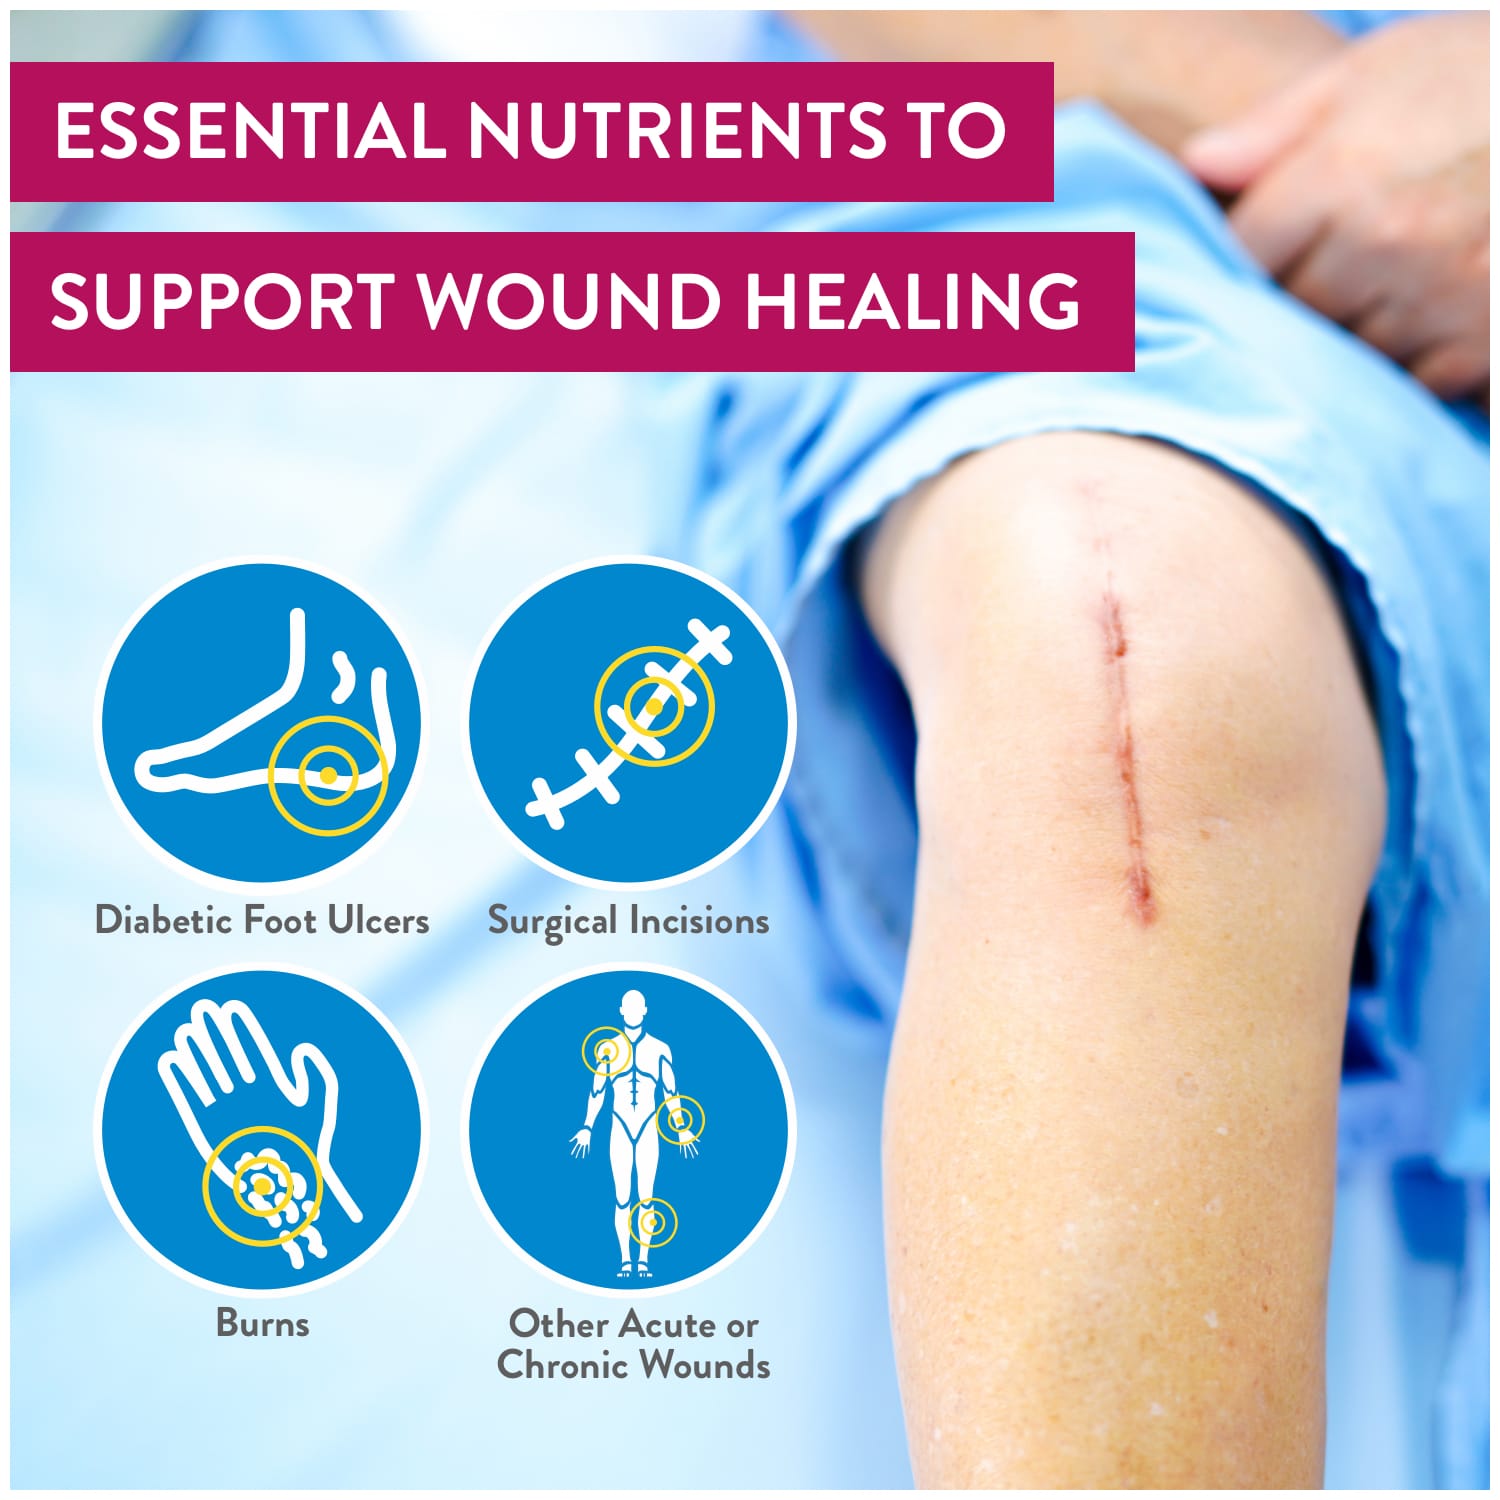 Essential nutrients to support wound healing